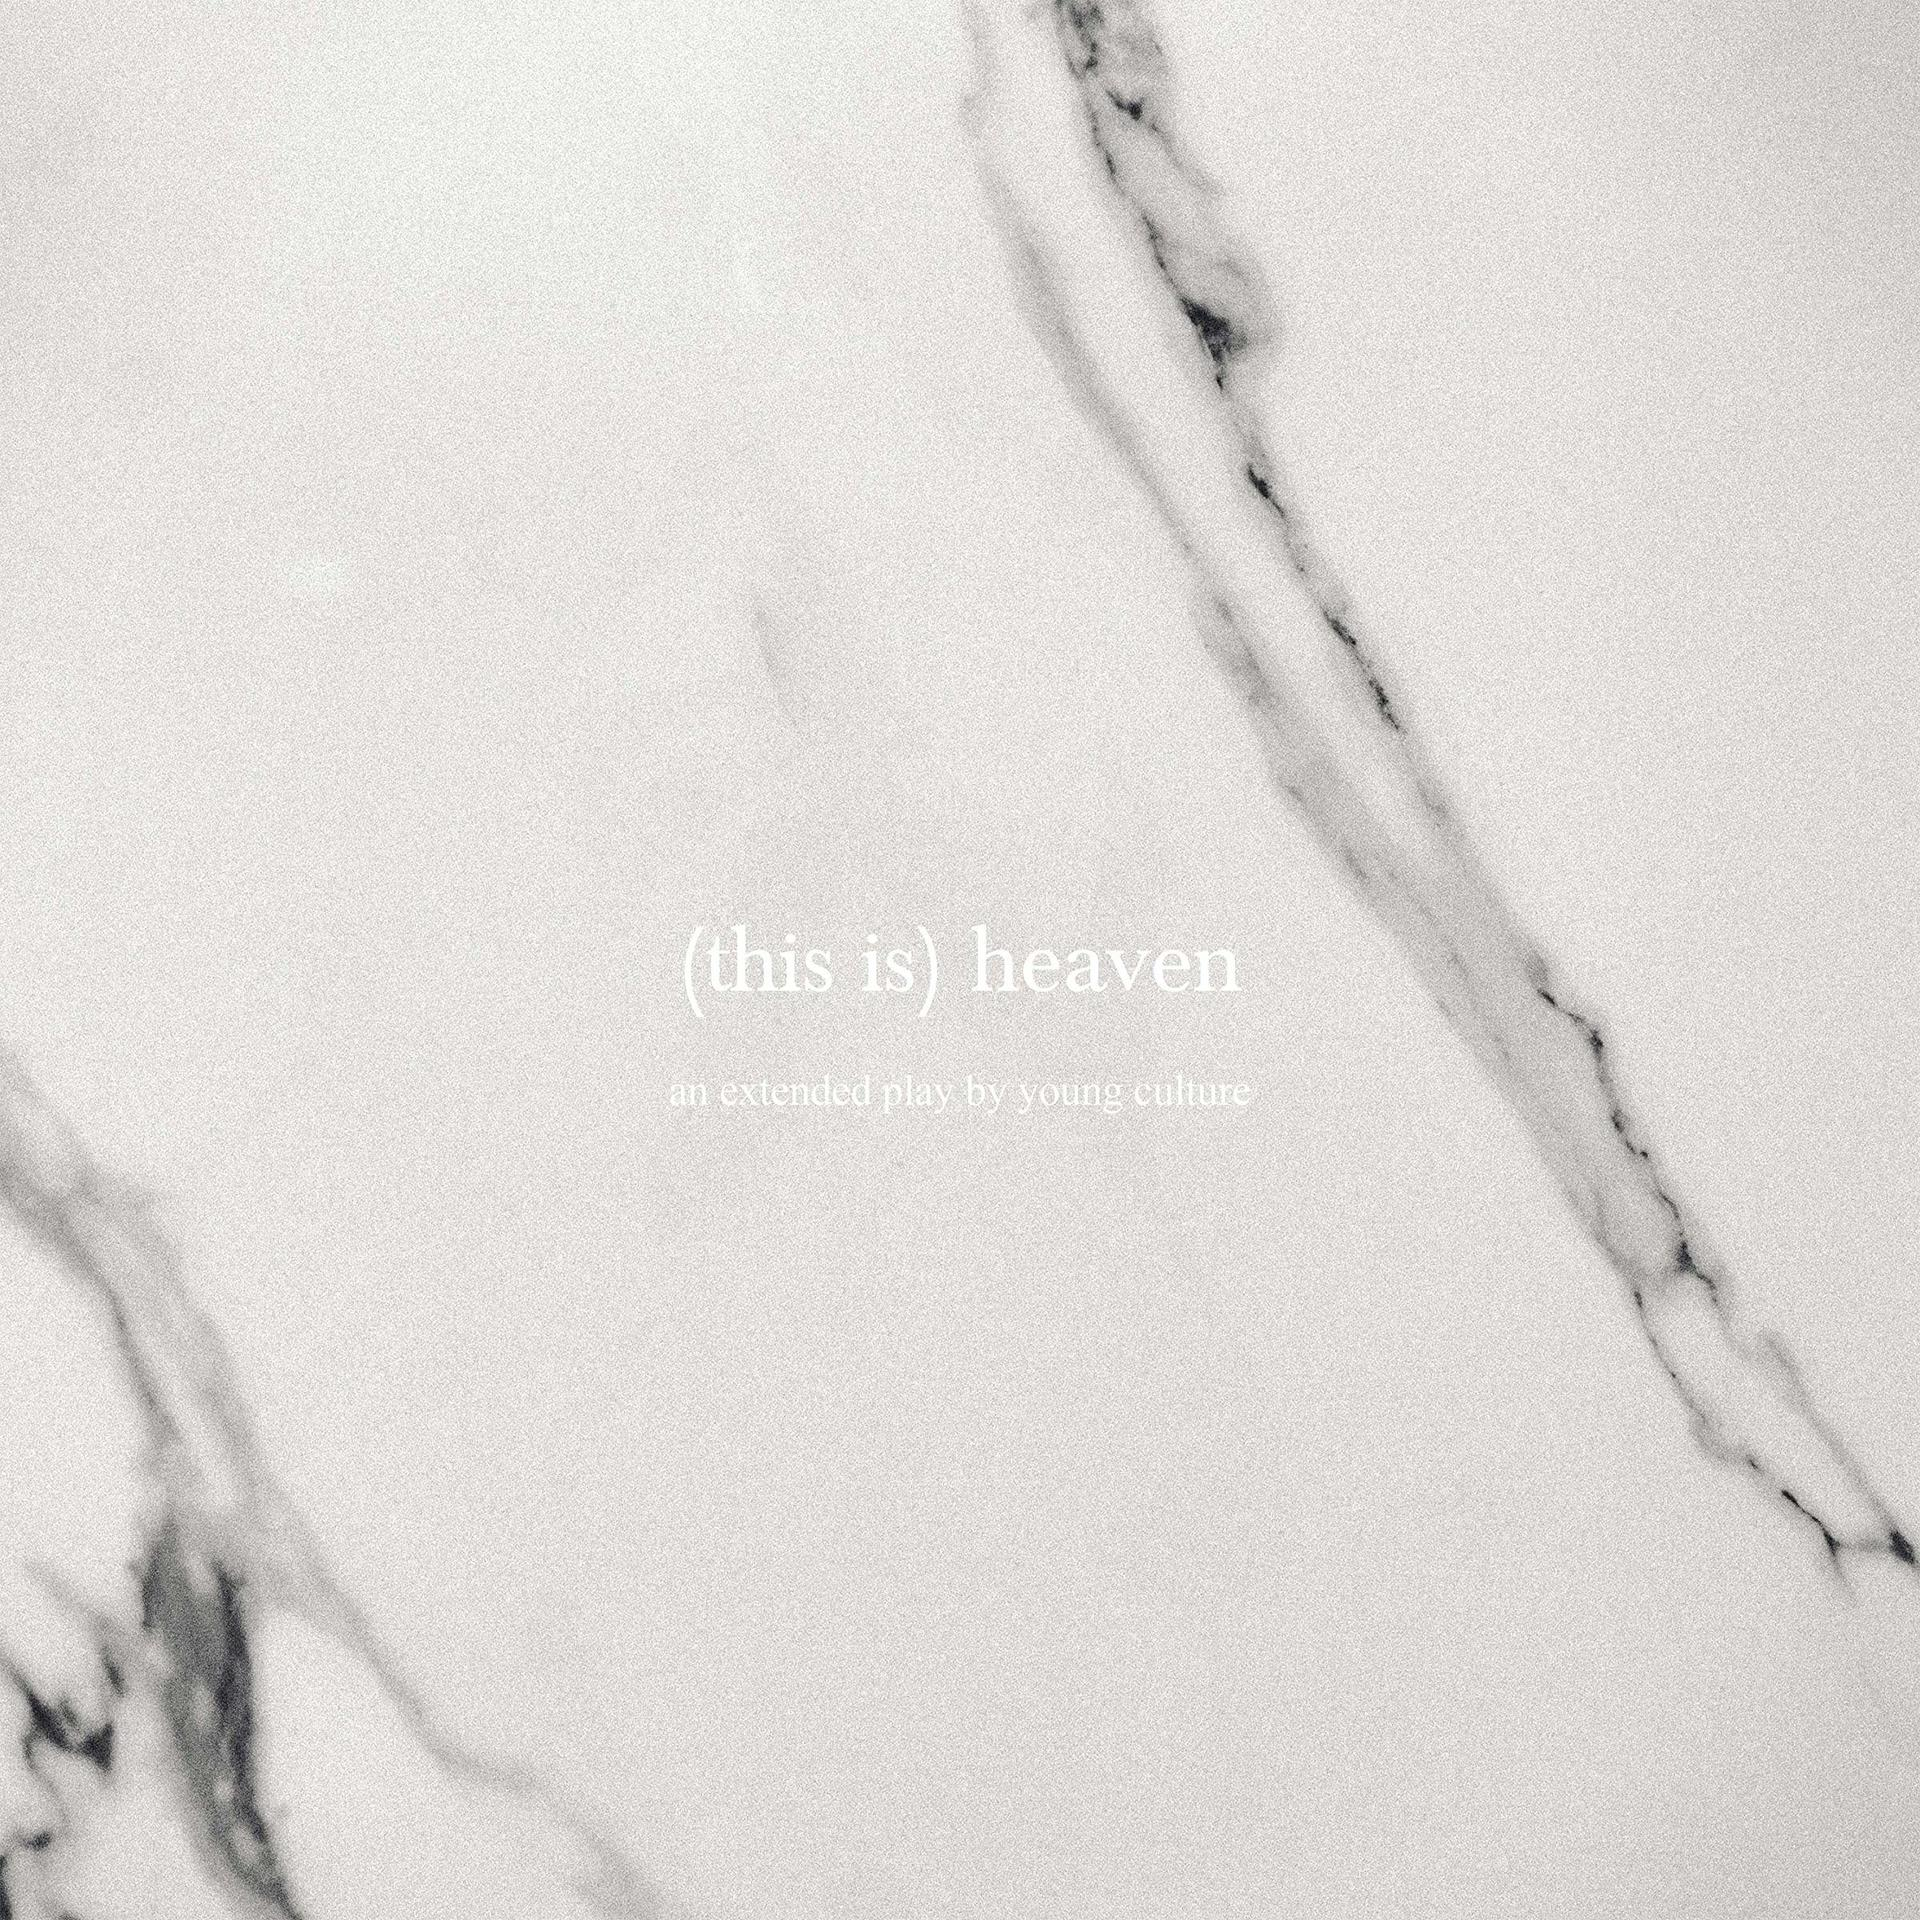 Young Culture - (This Is) Heaven - (CD)